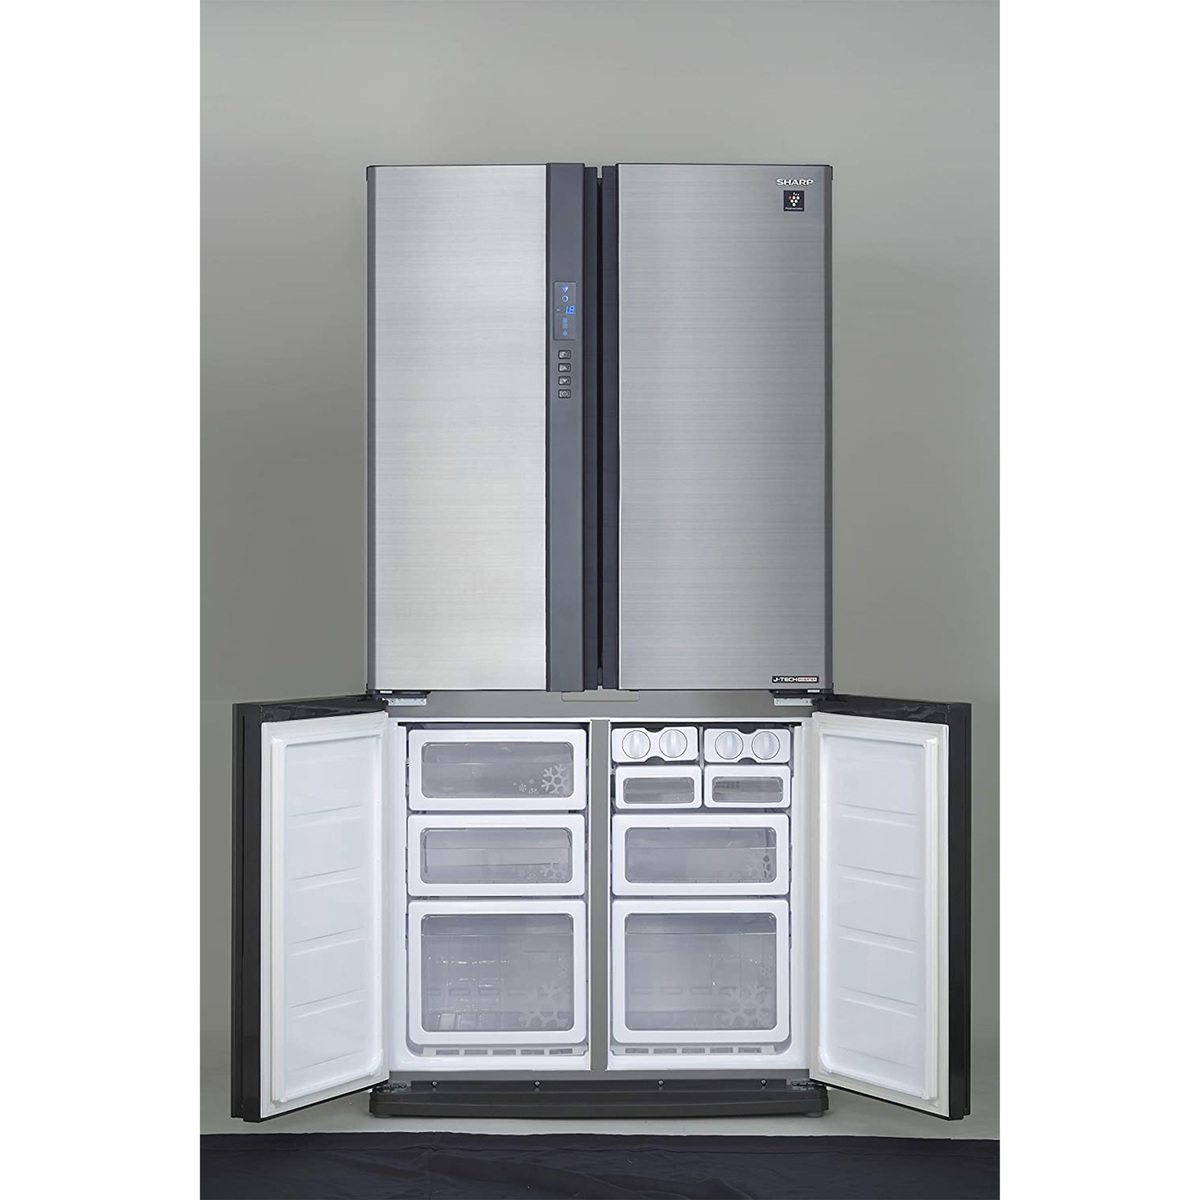 Sharp Olive Inverter Series With Plasmacluster Ion Technology 605 Ltrs (Net Capacity) French Door Refrigerator, Stainless Steel Color, SJ-FE87-SS3